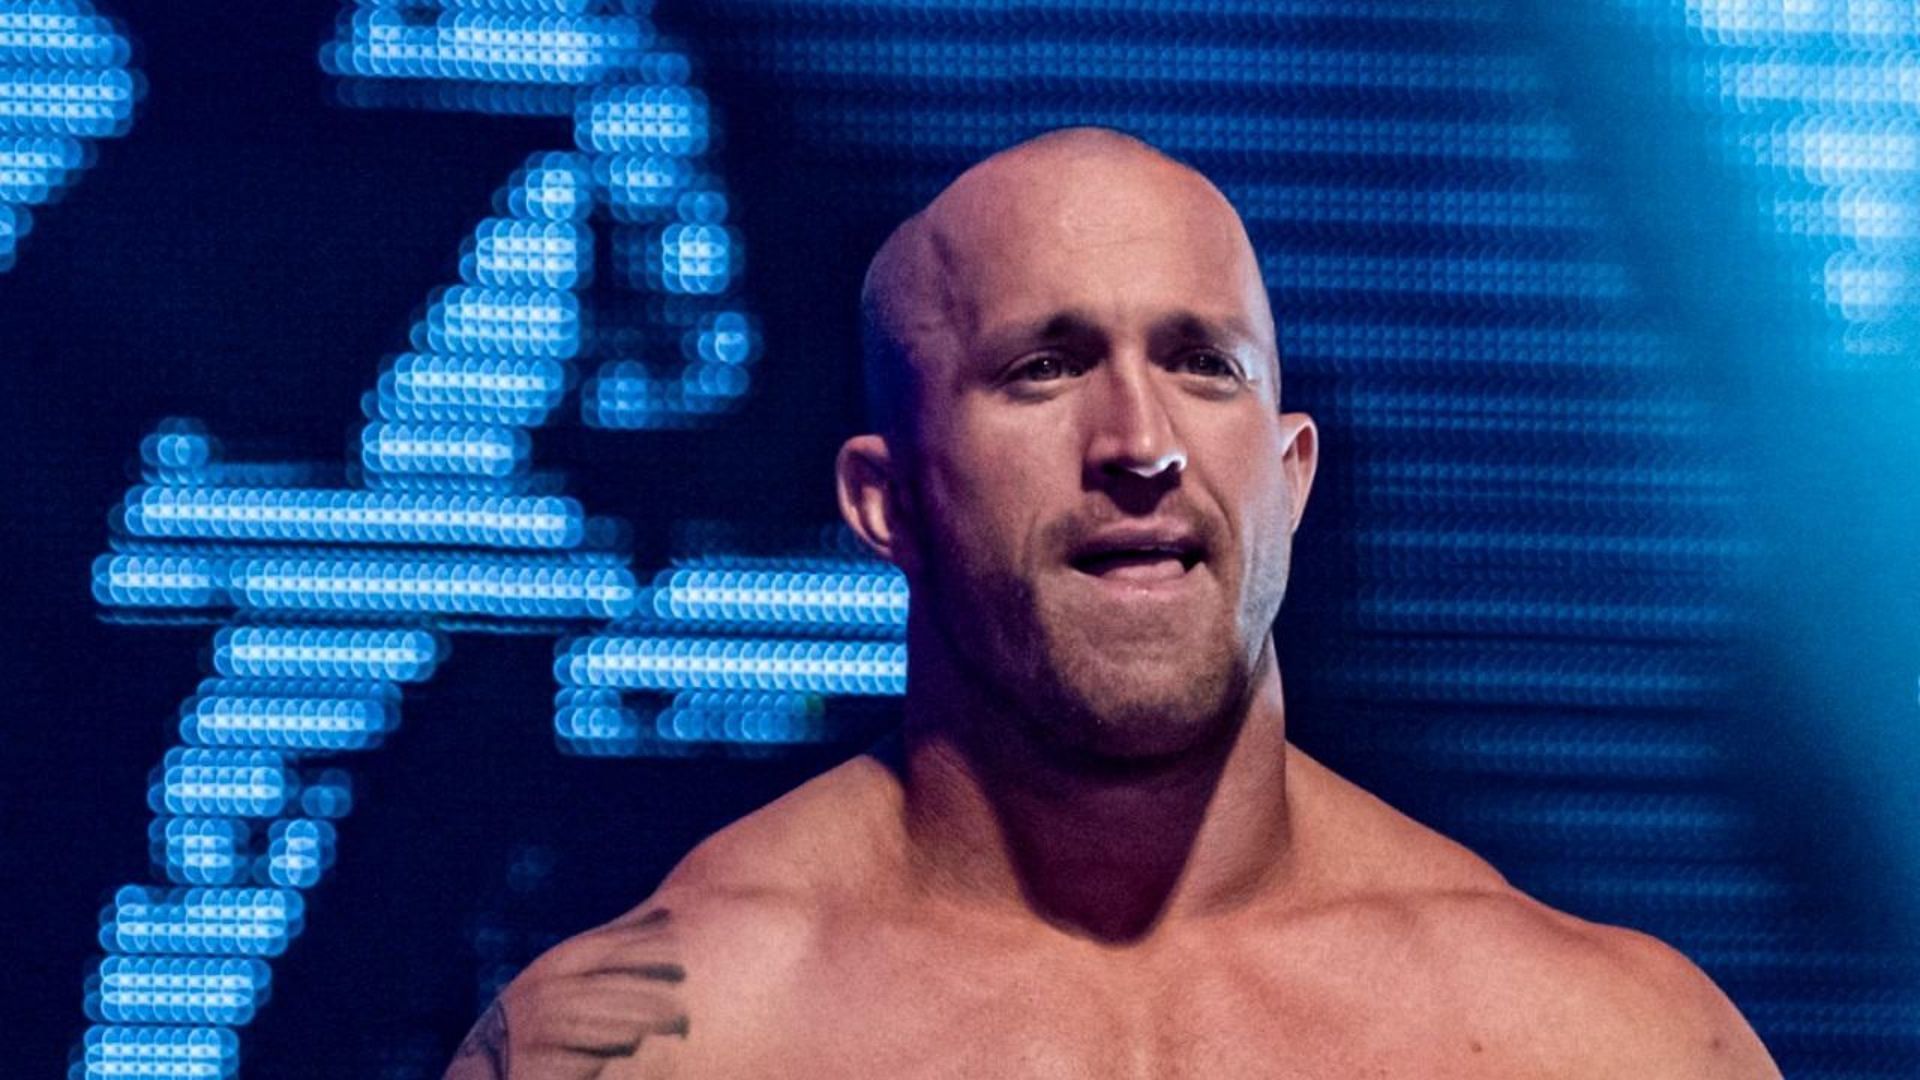 Mike Bennett currently performs for AAW and IMPACT Wrestling